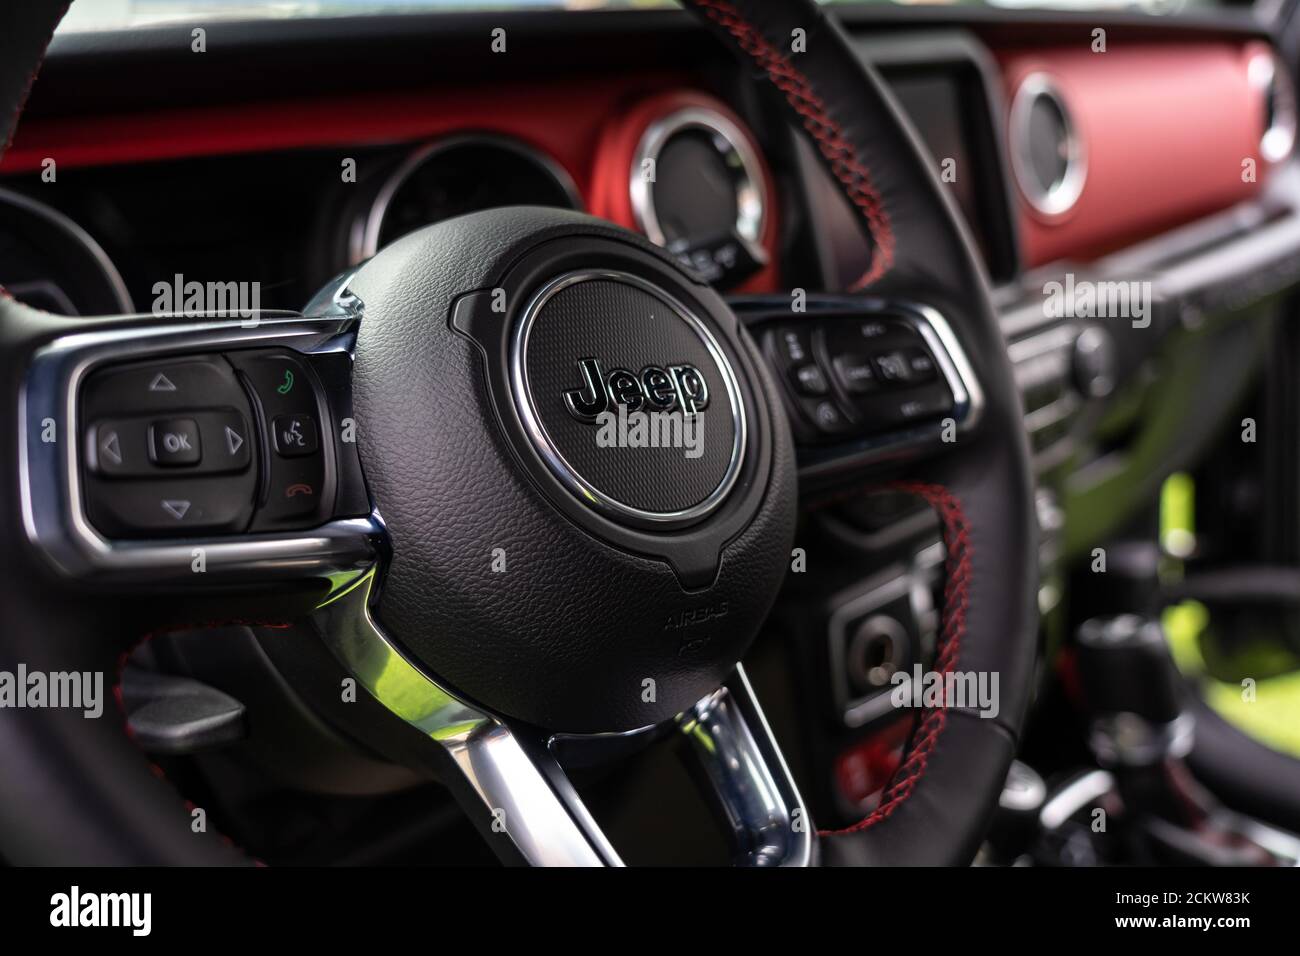 DIEDERSDORF, GERMANY - AUGUST 30, 2020: The interior of mid-size SUV Jeep Wrangler Unlimited Rubicon, 2020. The exhibition of 'US Car Classics'. Stock Photo